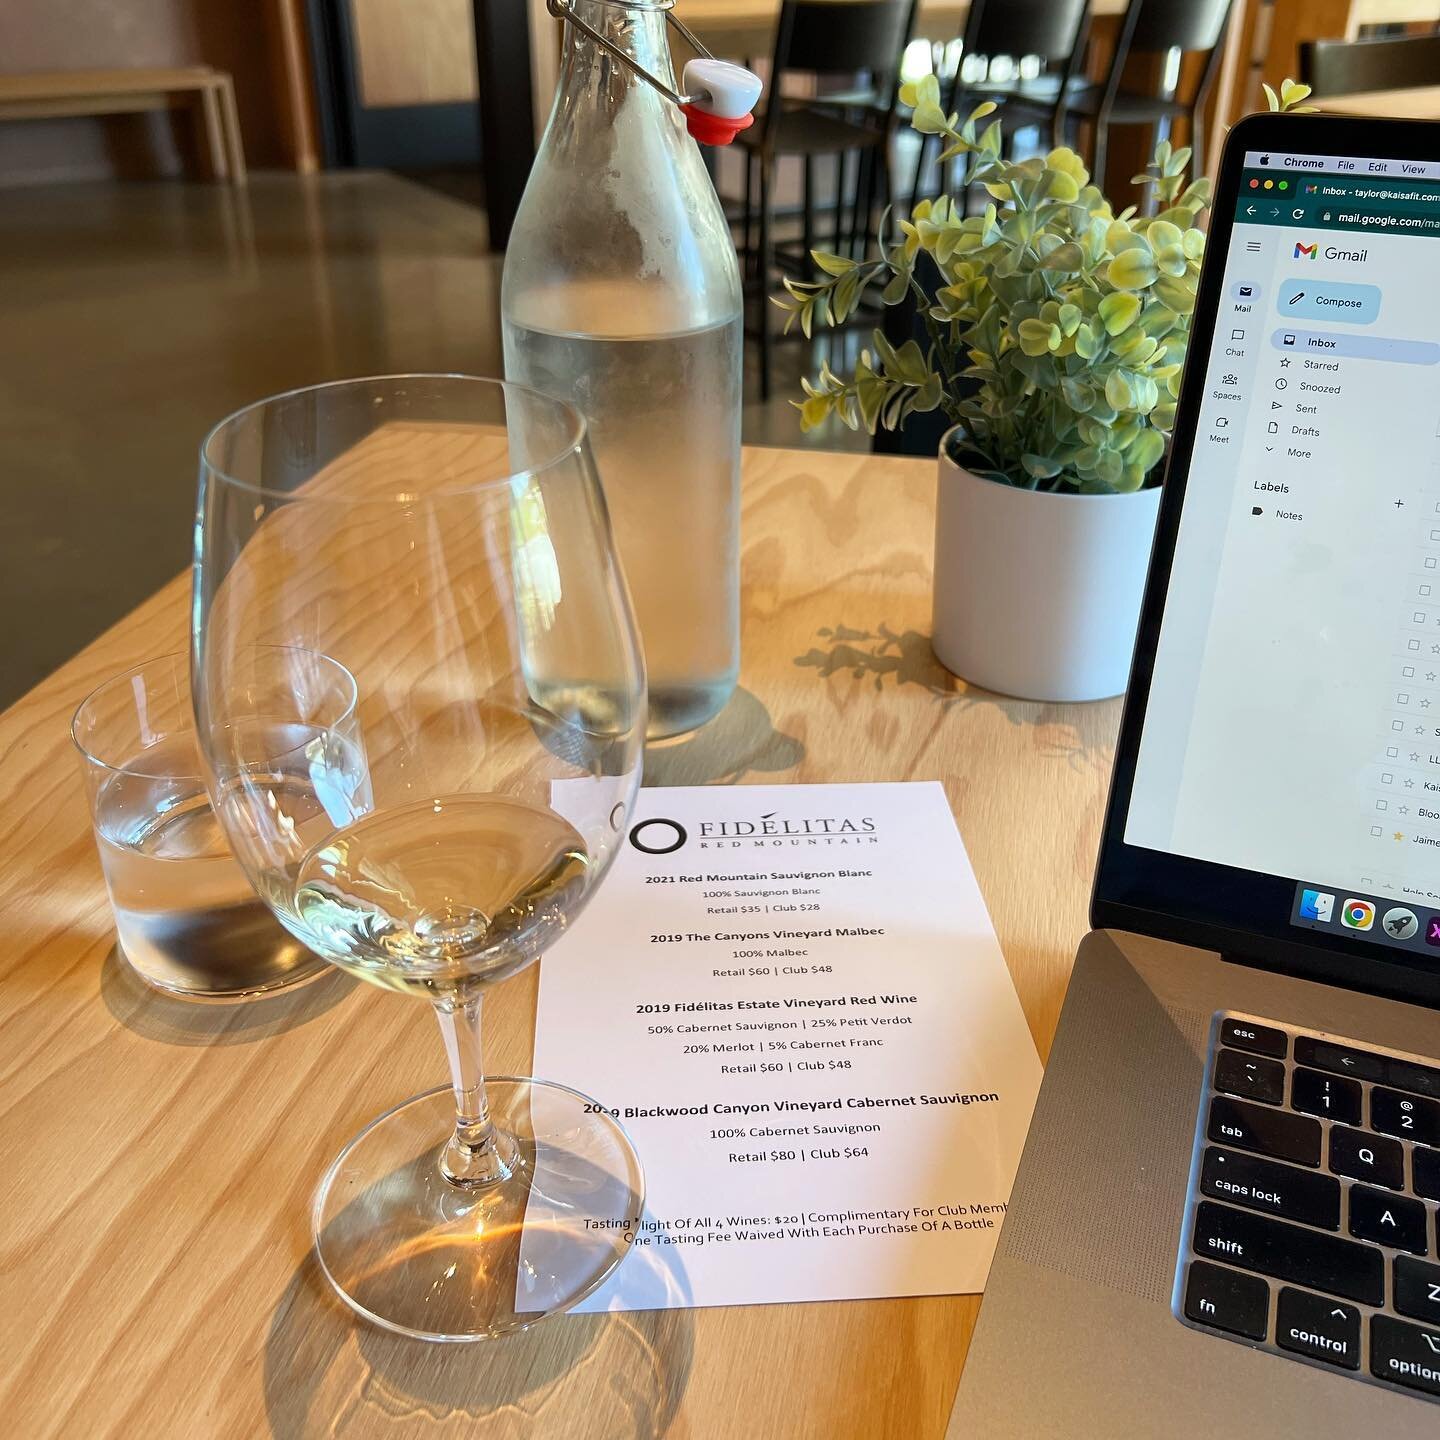 If work has to get done on a Friday, you may as well enjoy it! 🍷

Treating myself to a tasting in @fidelitaswines gorgeous new tasting room in Woodinville! ✨

How are you enjoying your Friday afternoon??